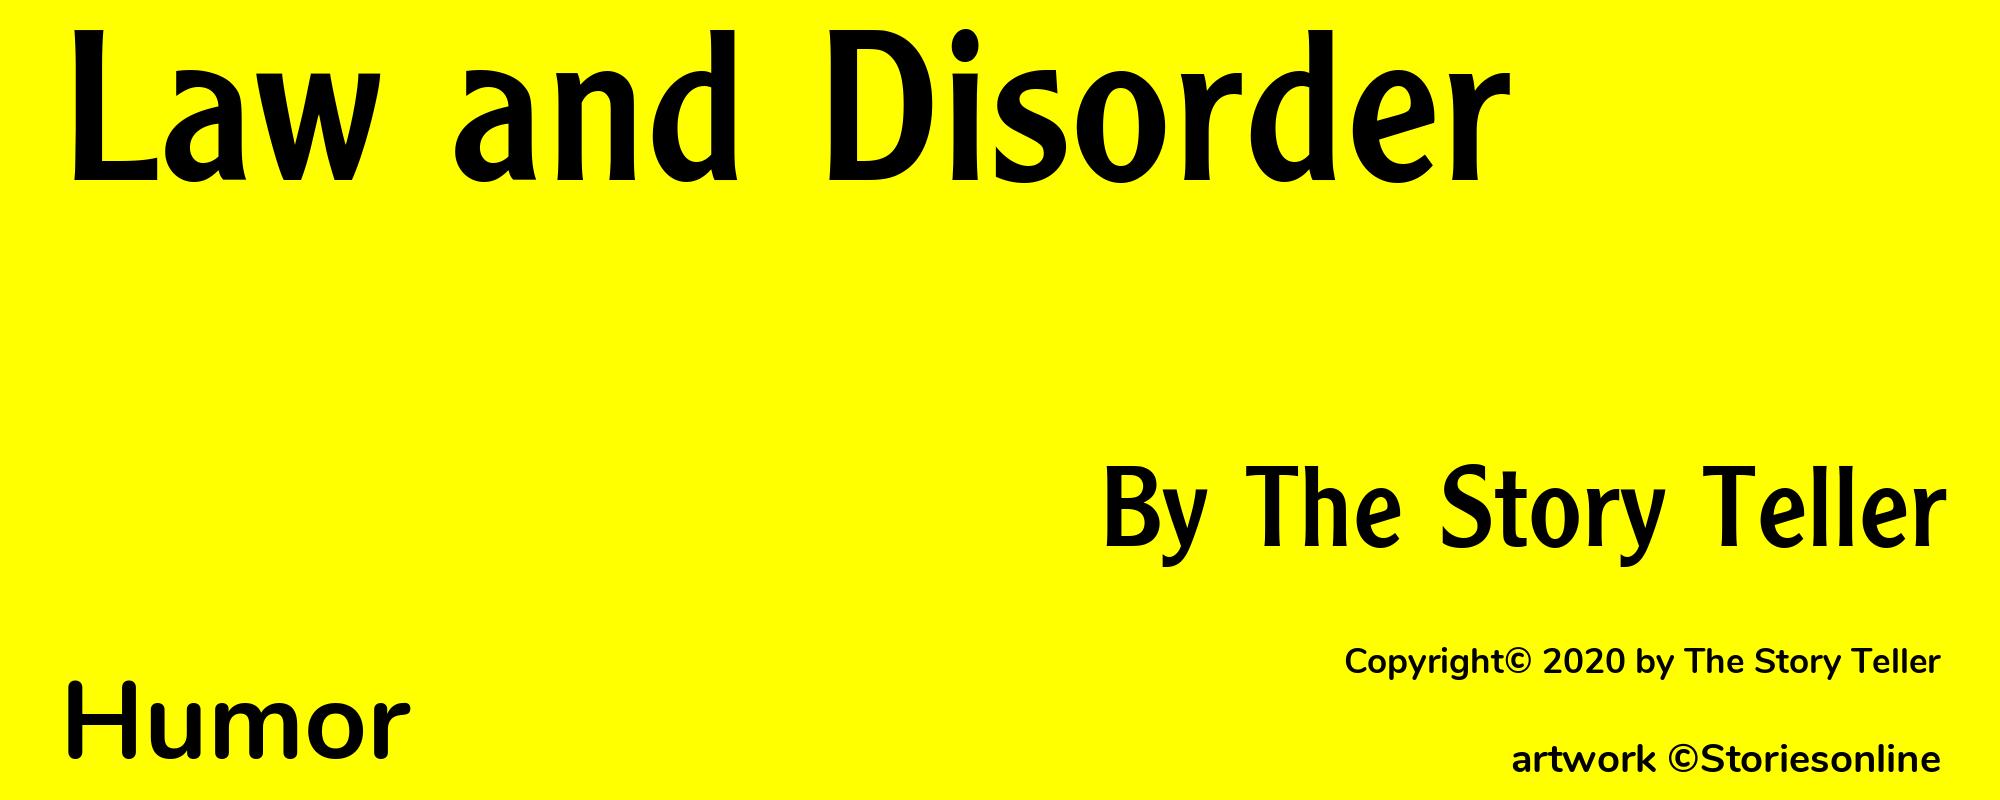 Law and Disorder - Cover